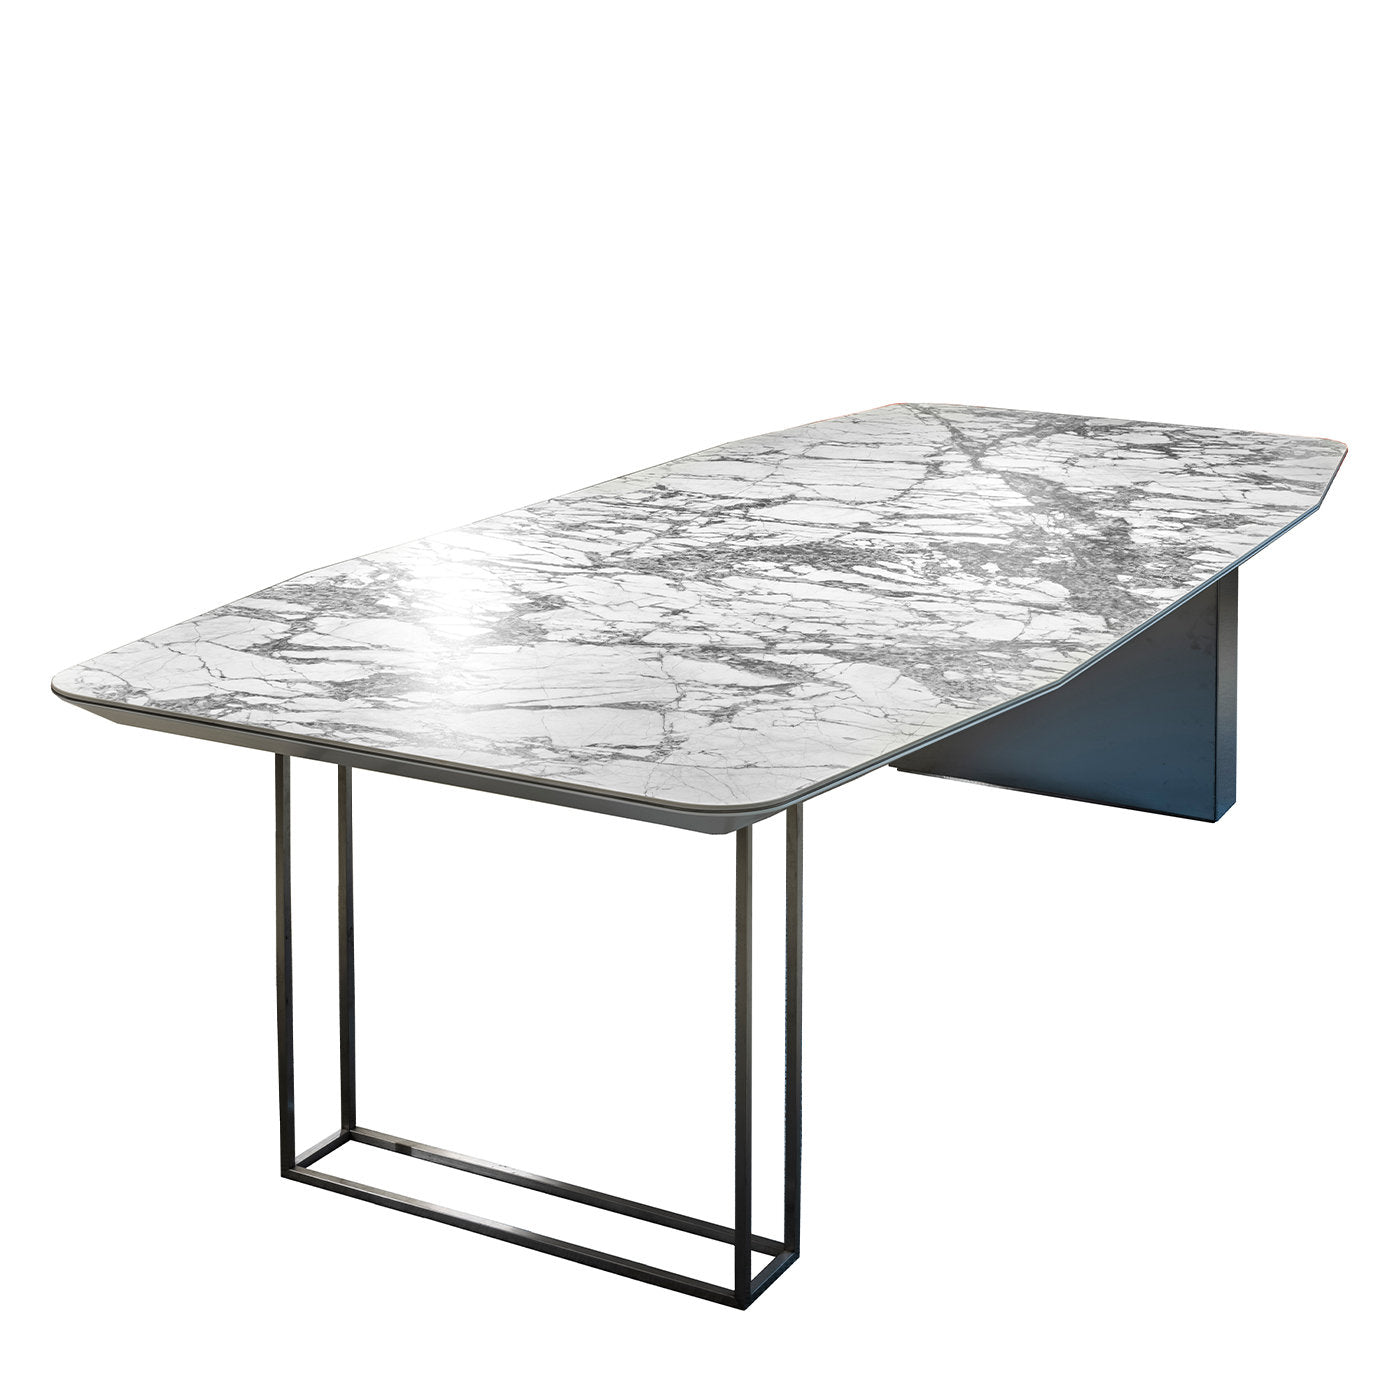 Rectangular Table with Invisible Blue Top - Alternative view 1